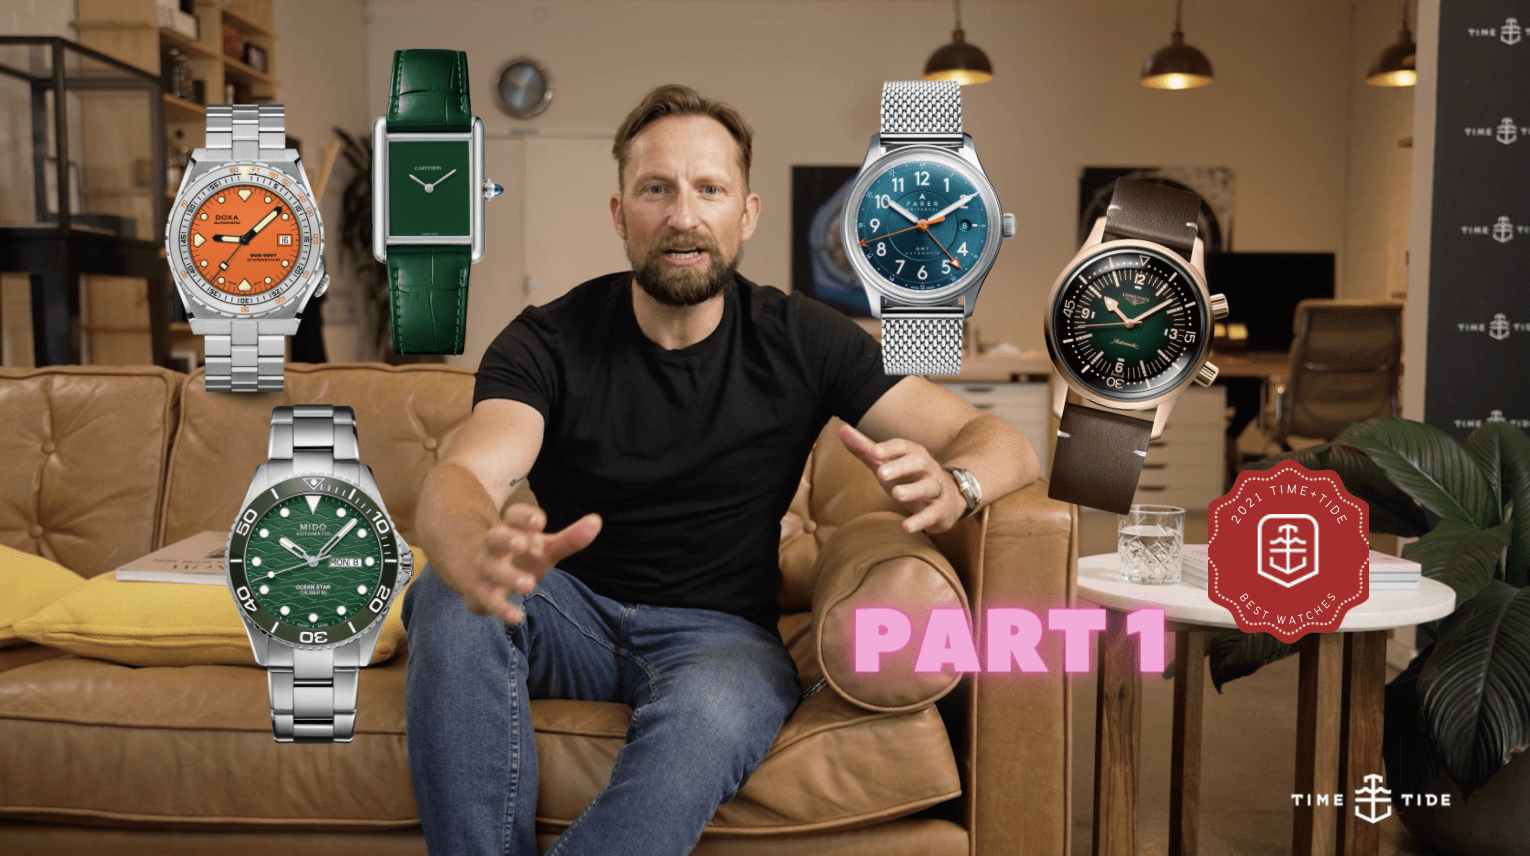 VIDEO: The top 5 watches of 2021 from $1000-$5000 (Part 1)